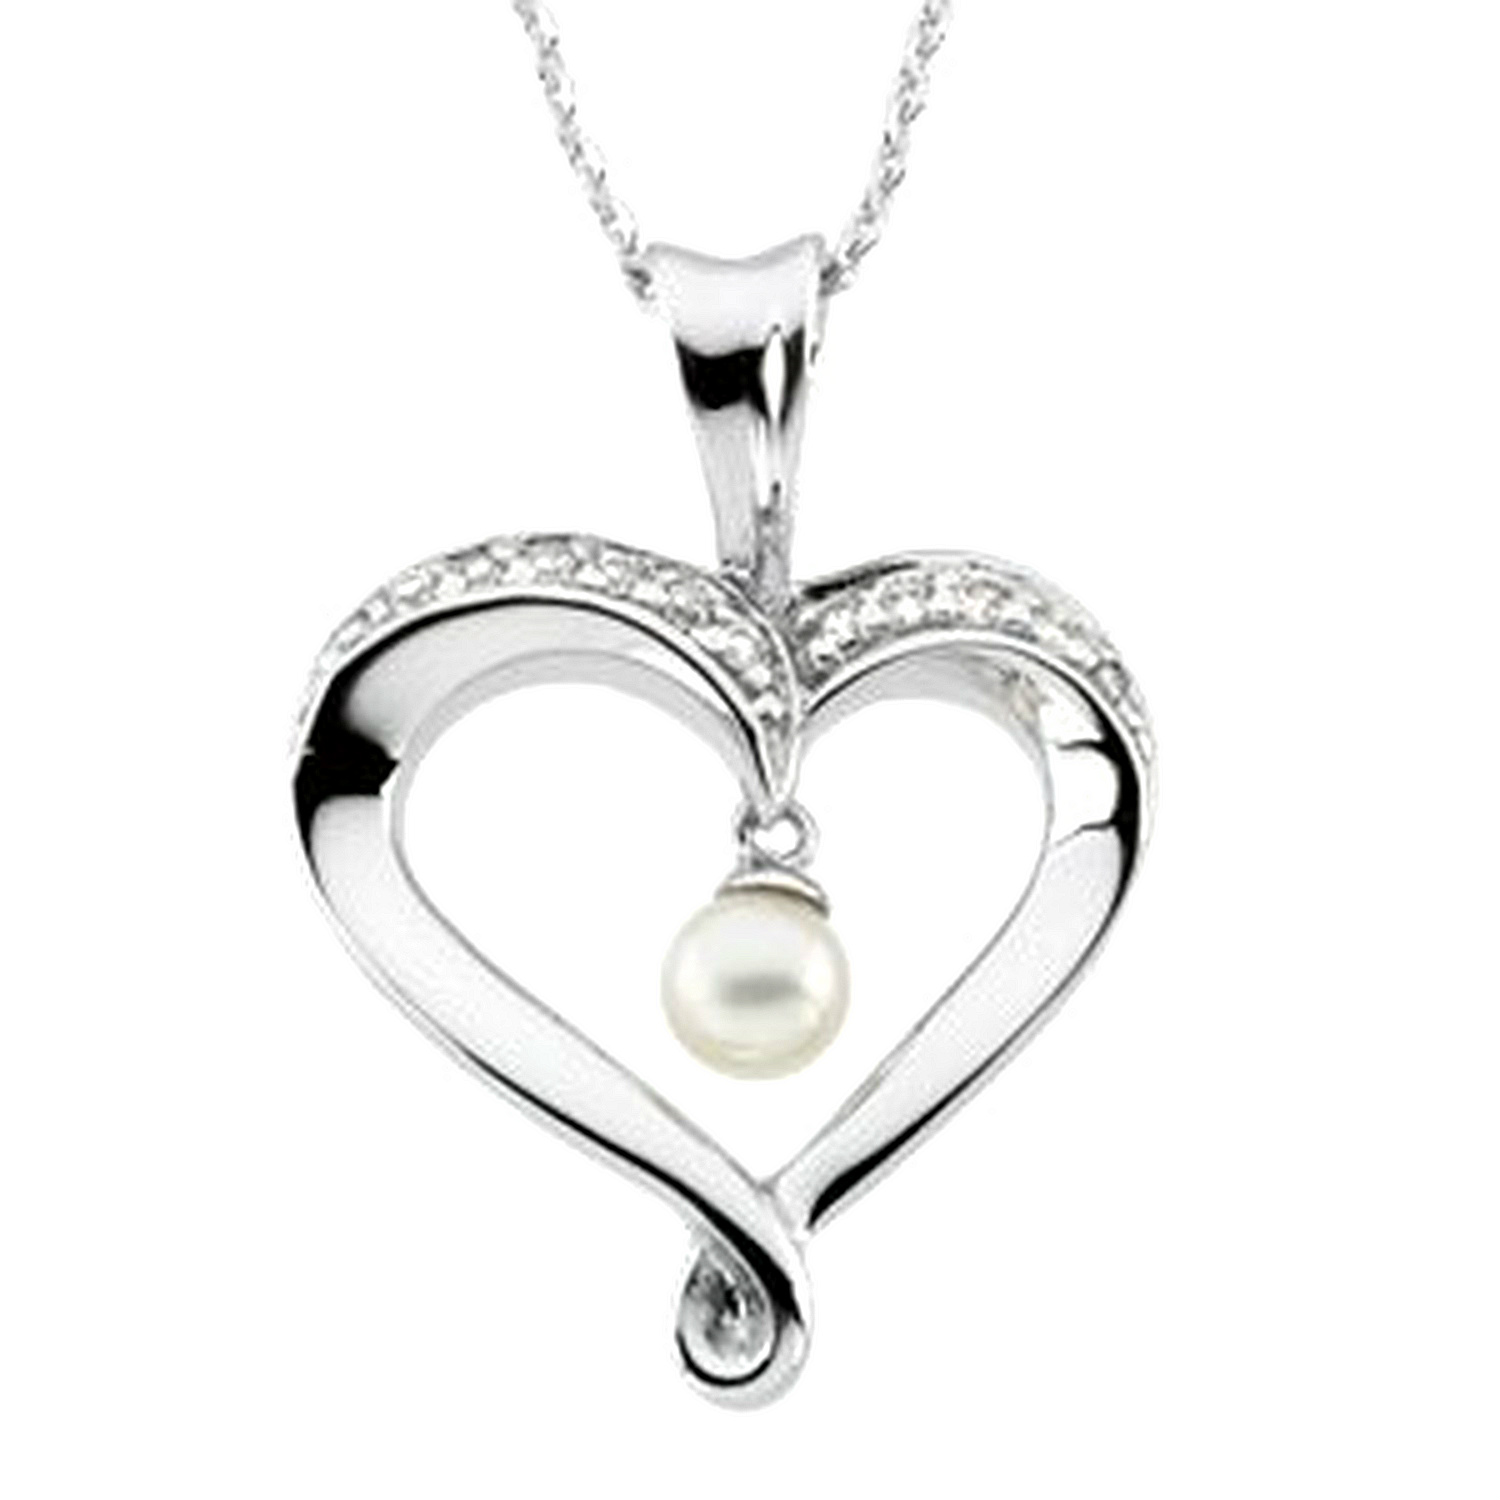 'Heart and Soul' Pearl and CZ Rhodium Plate Sterling Silver Necklace, 18"